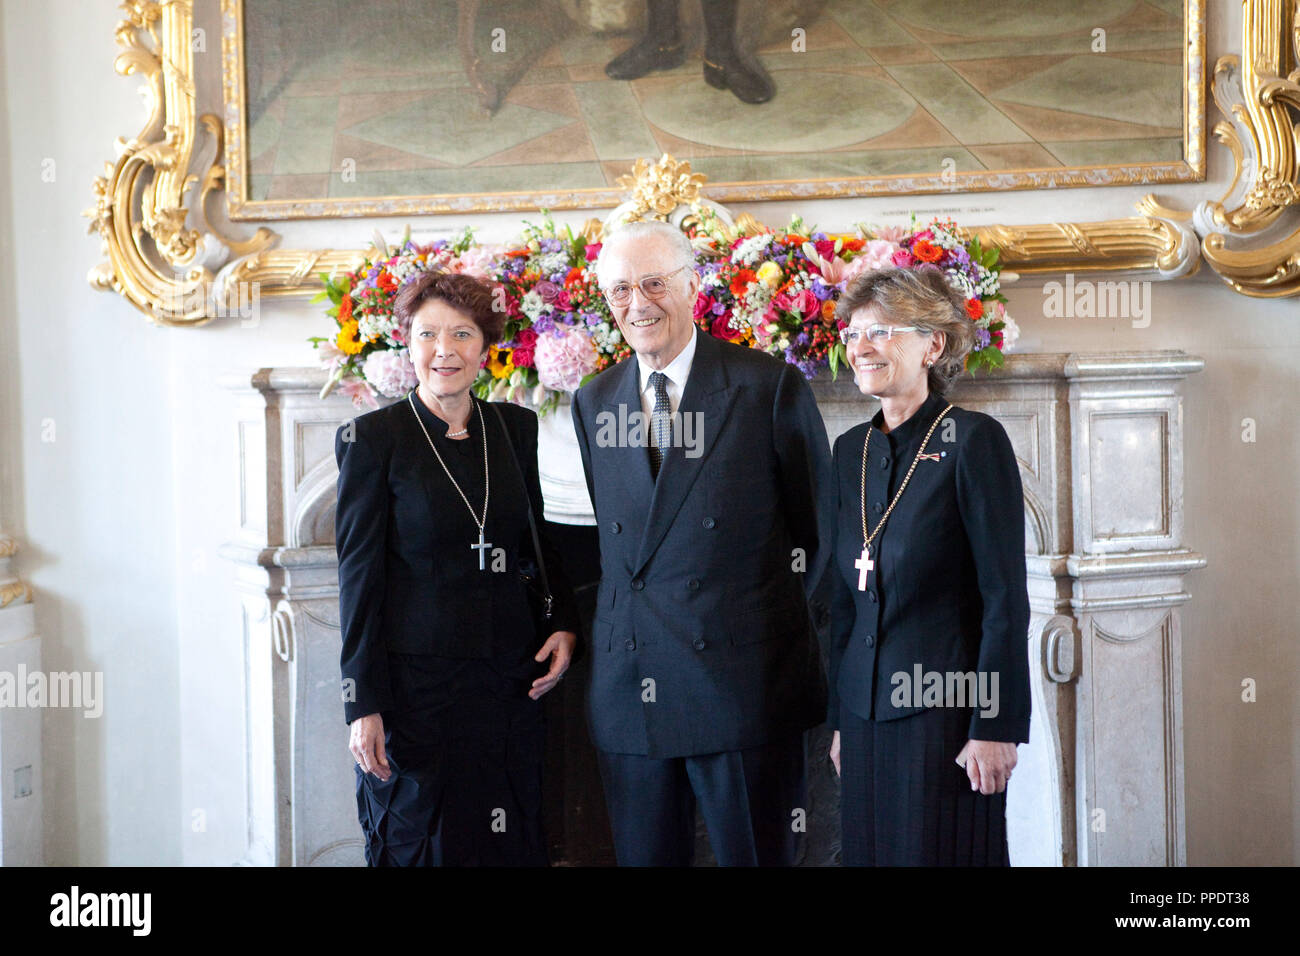 Regional bishop Susanne Breit Kessler (right) congratulates the jubilarian His Royal Highness Franz Duke of Bavaria at the reception on the occasion of his 80th birthday in Schleissheim Palace. Stock Photo